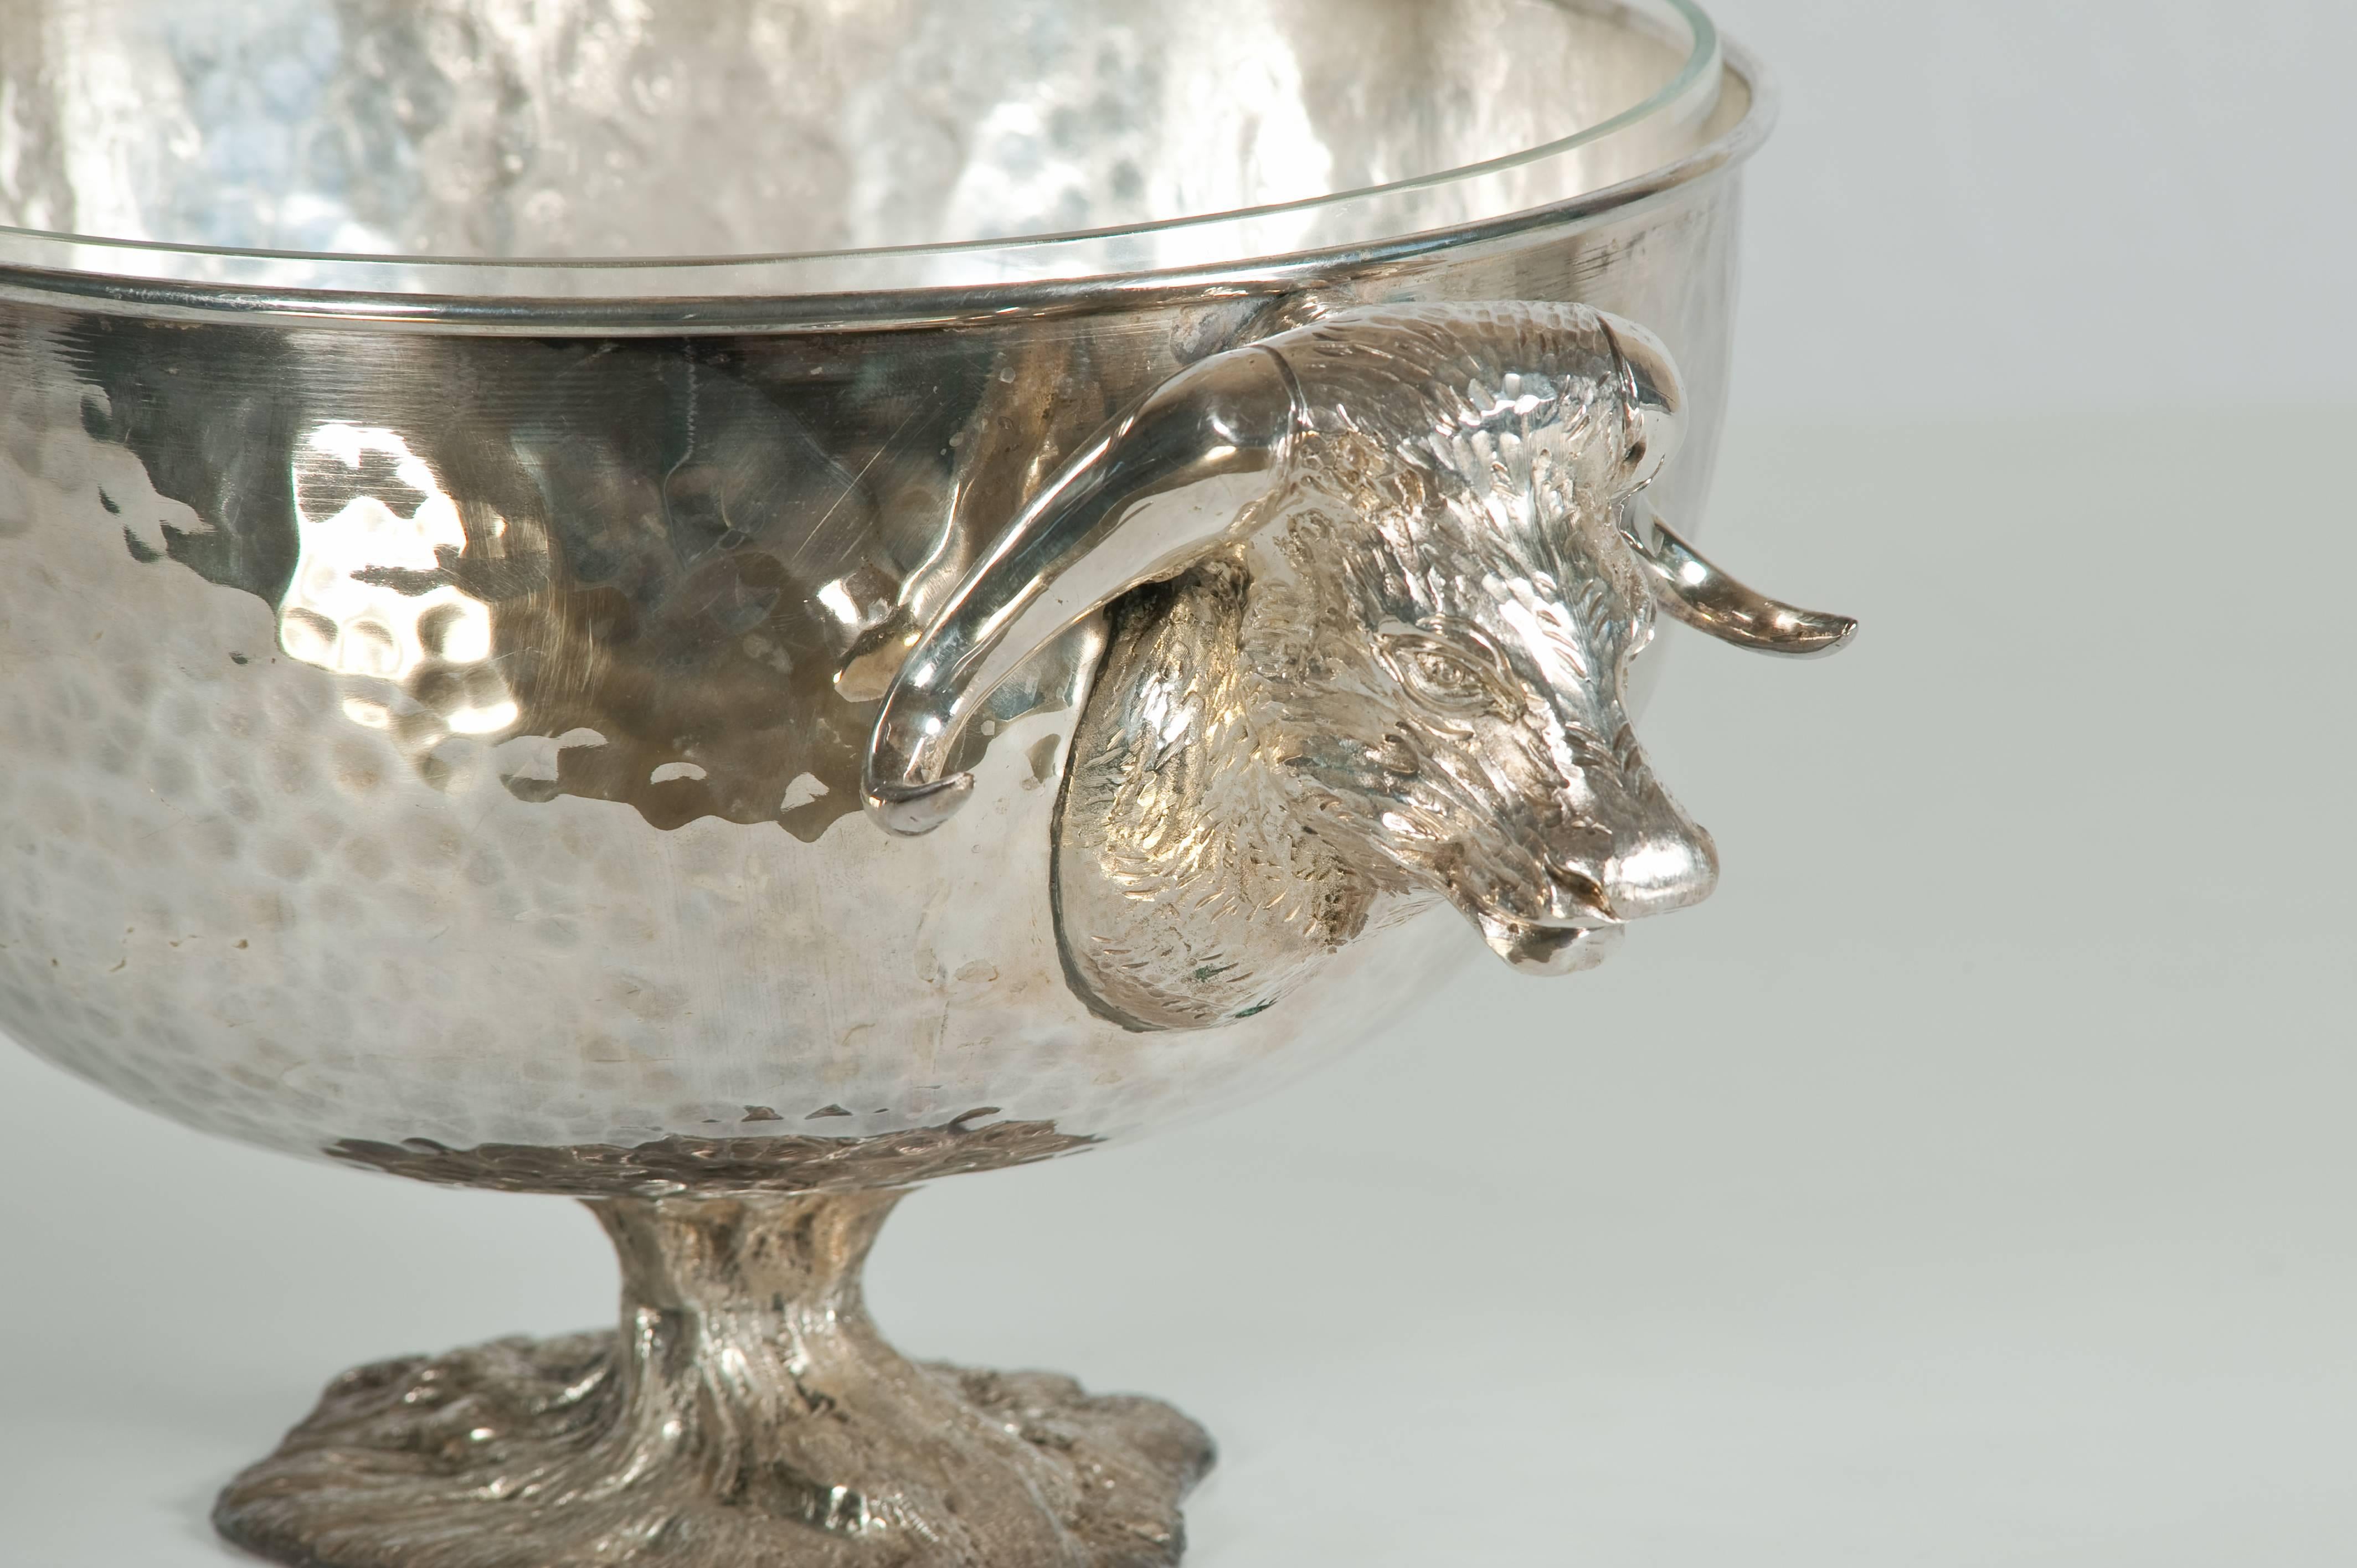 Silver plated centerpiece with buffalos.
Signed Gabriella Crespi.